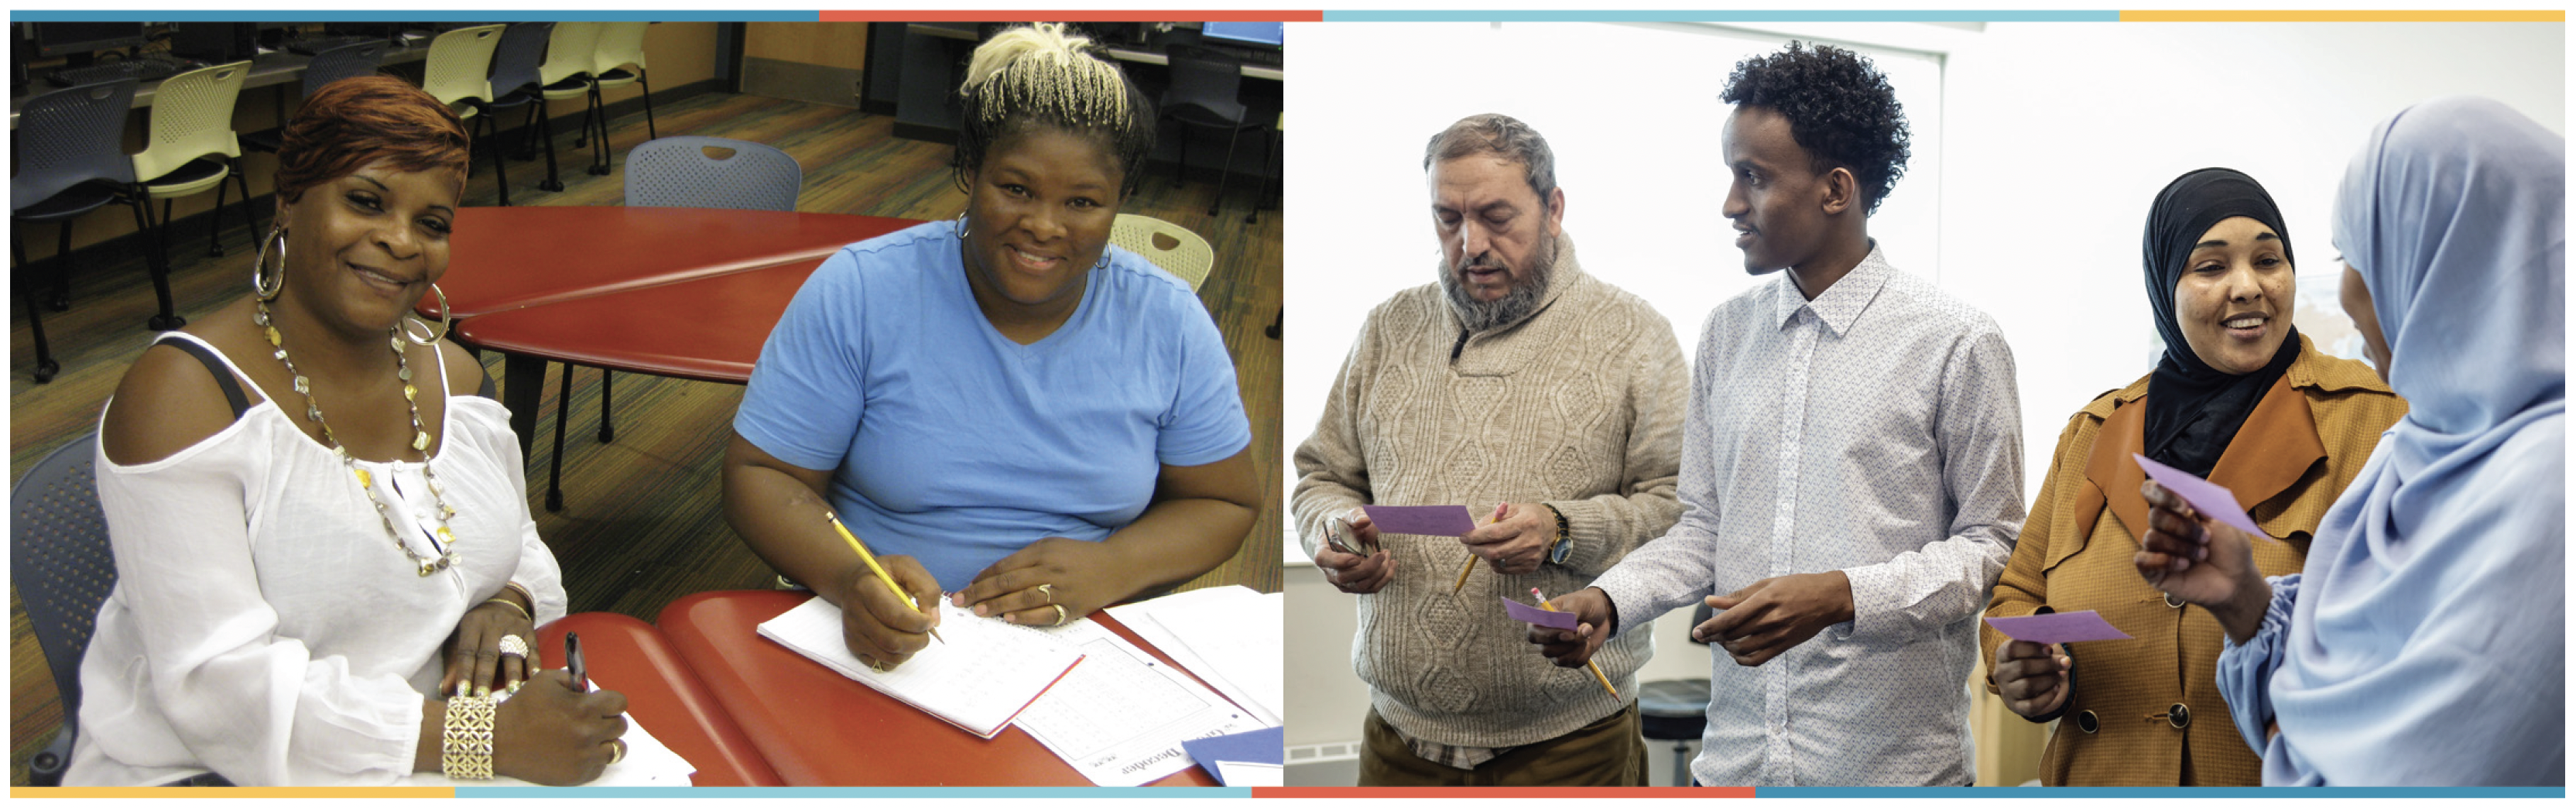 Two Photos side by side. Photo on the left- two African American Women learners sit together and smile at the camera. The second photo on the right - a group of students, two men and two women of different ethnicities converse with each other reading and asking questions from note cards. 